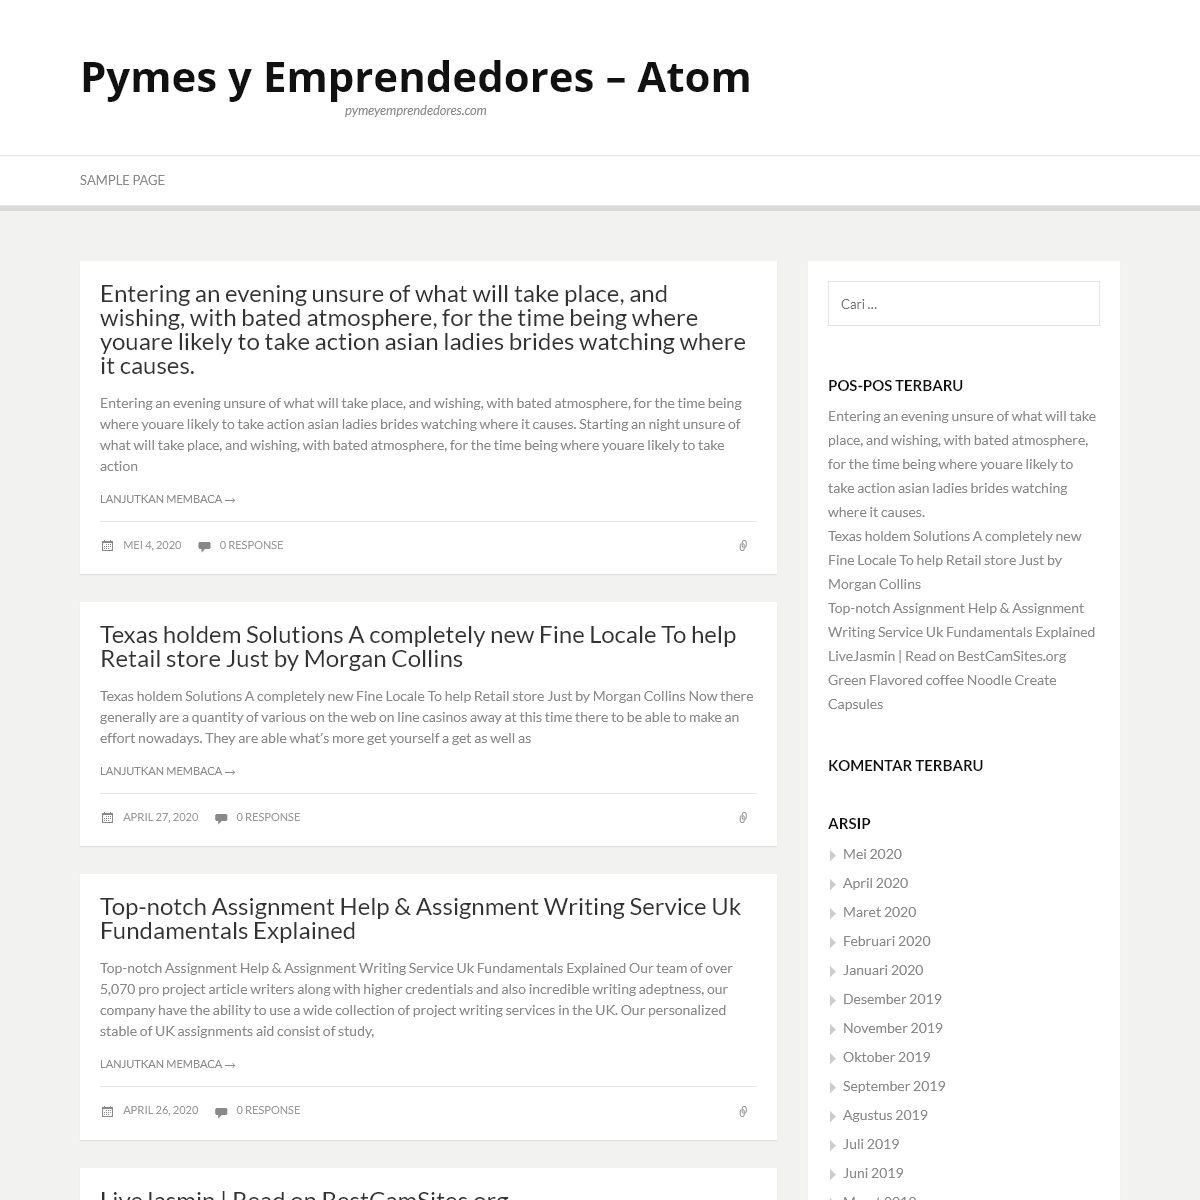 A complete backup of pymeyemprendedores.com